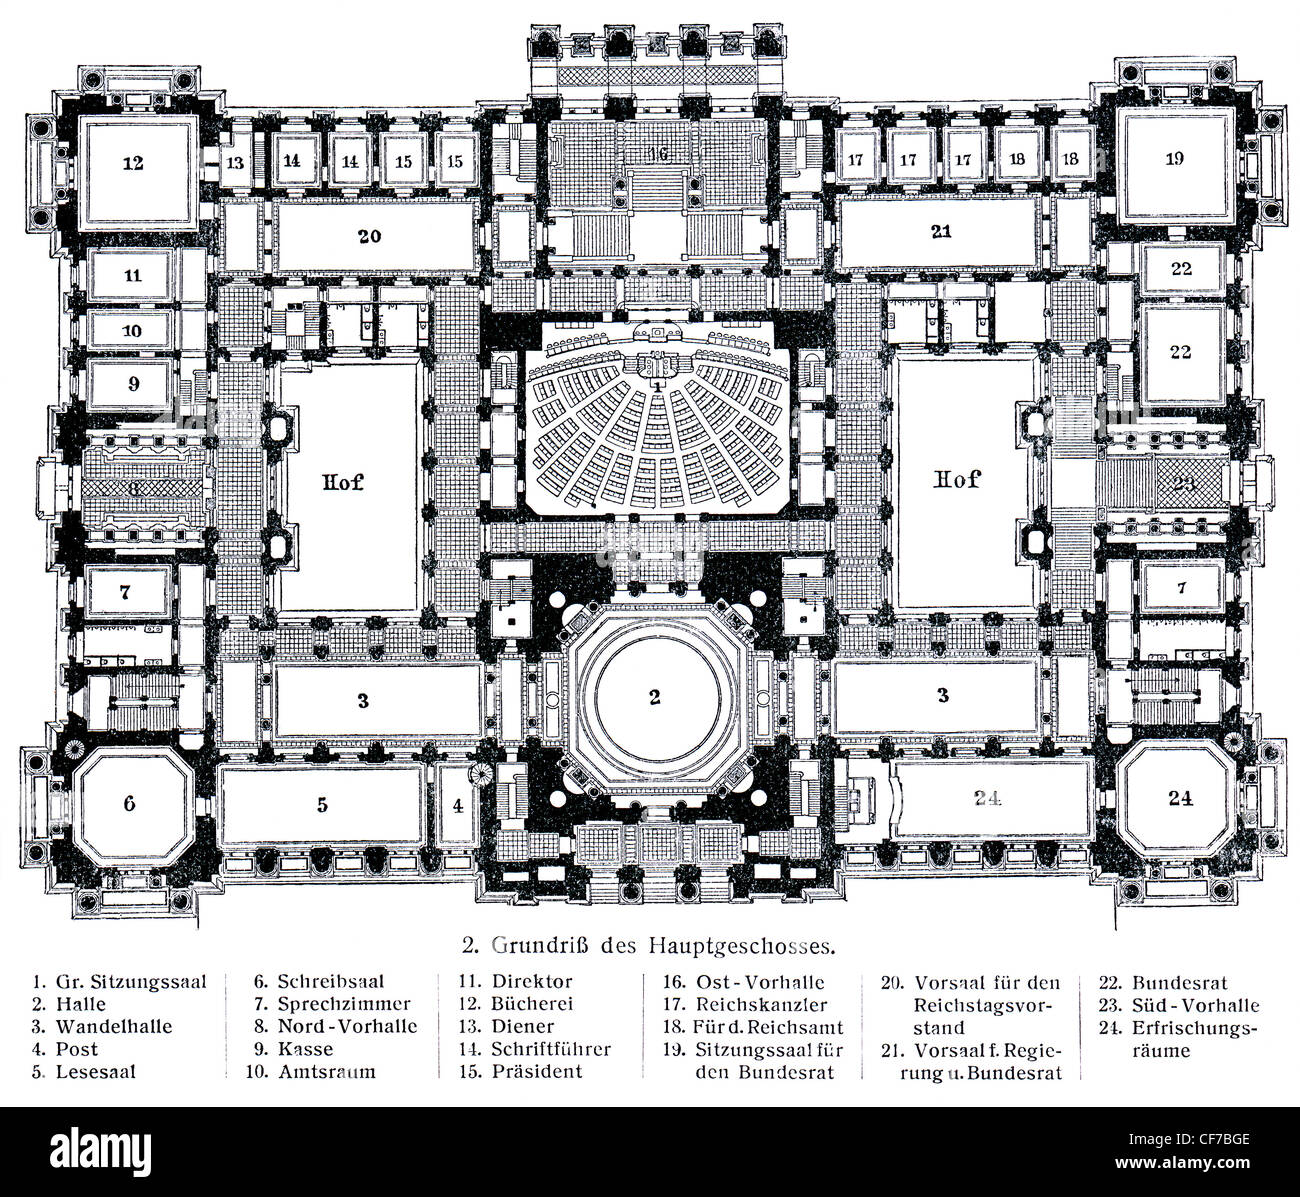 A schematic layout Reichstag. Publication of the book 'Meyers Konversations-Lexikon', Volume 7, Leipzig, Germany, 1910 Stock Photo